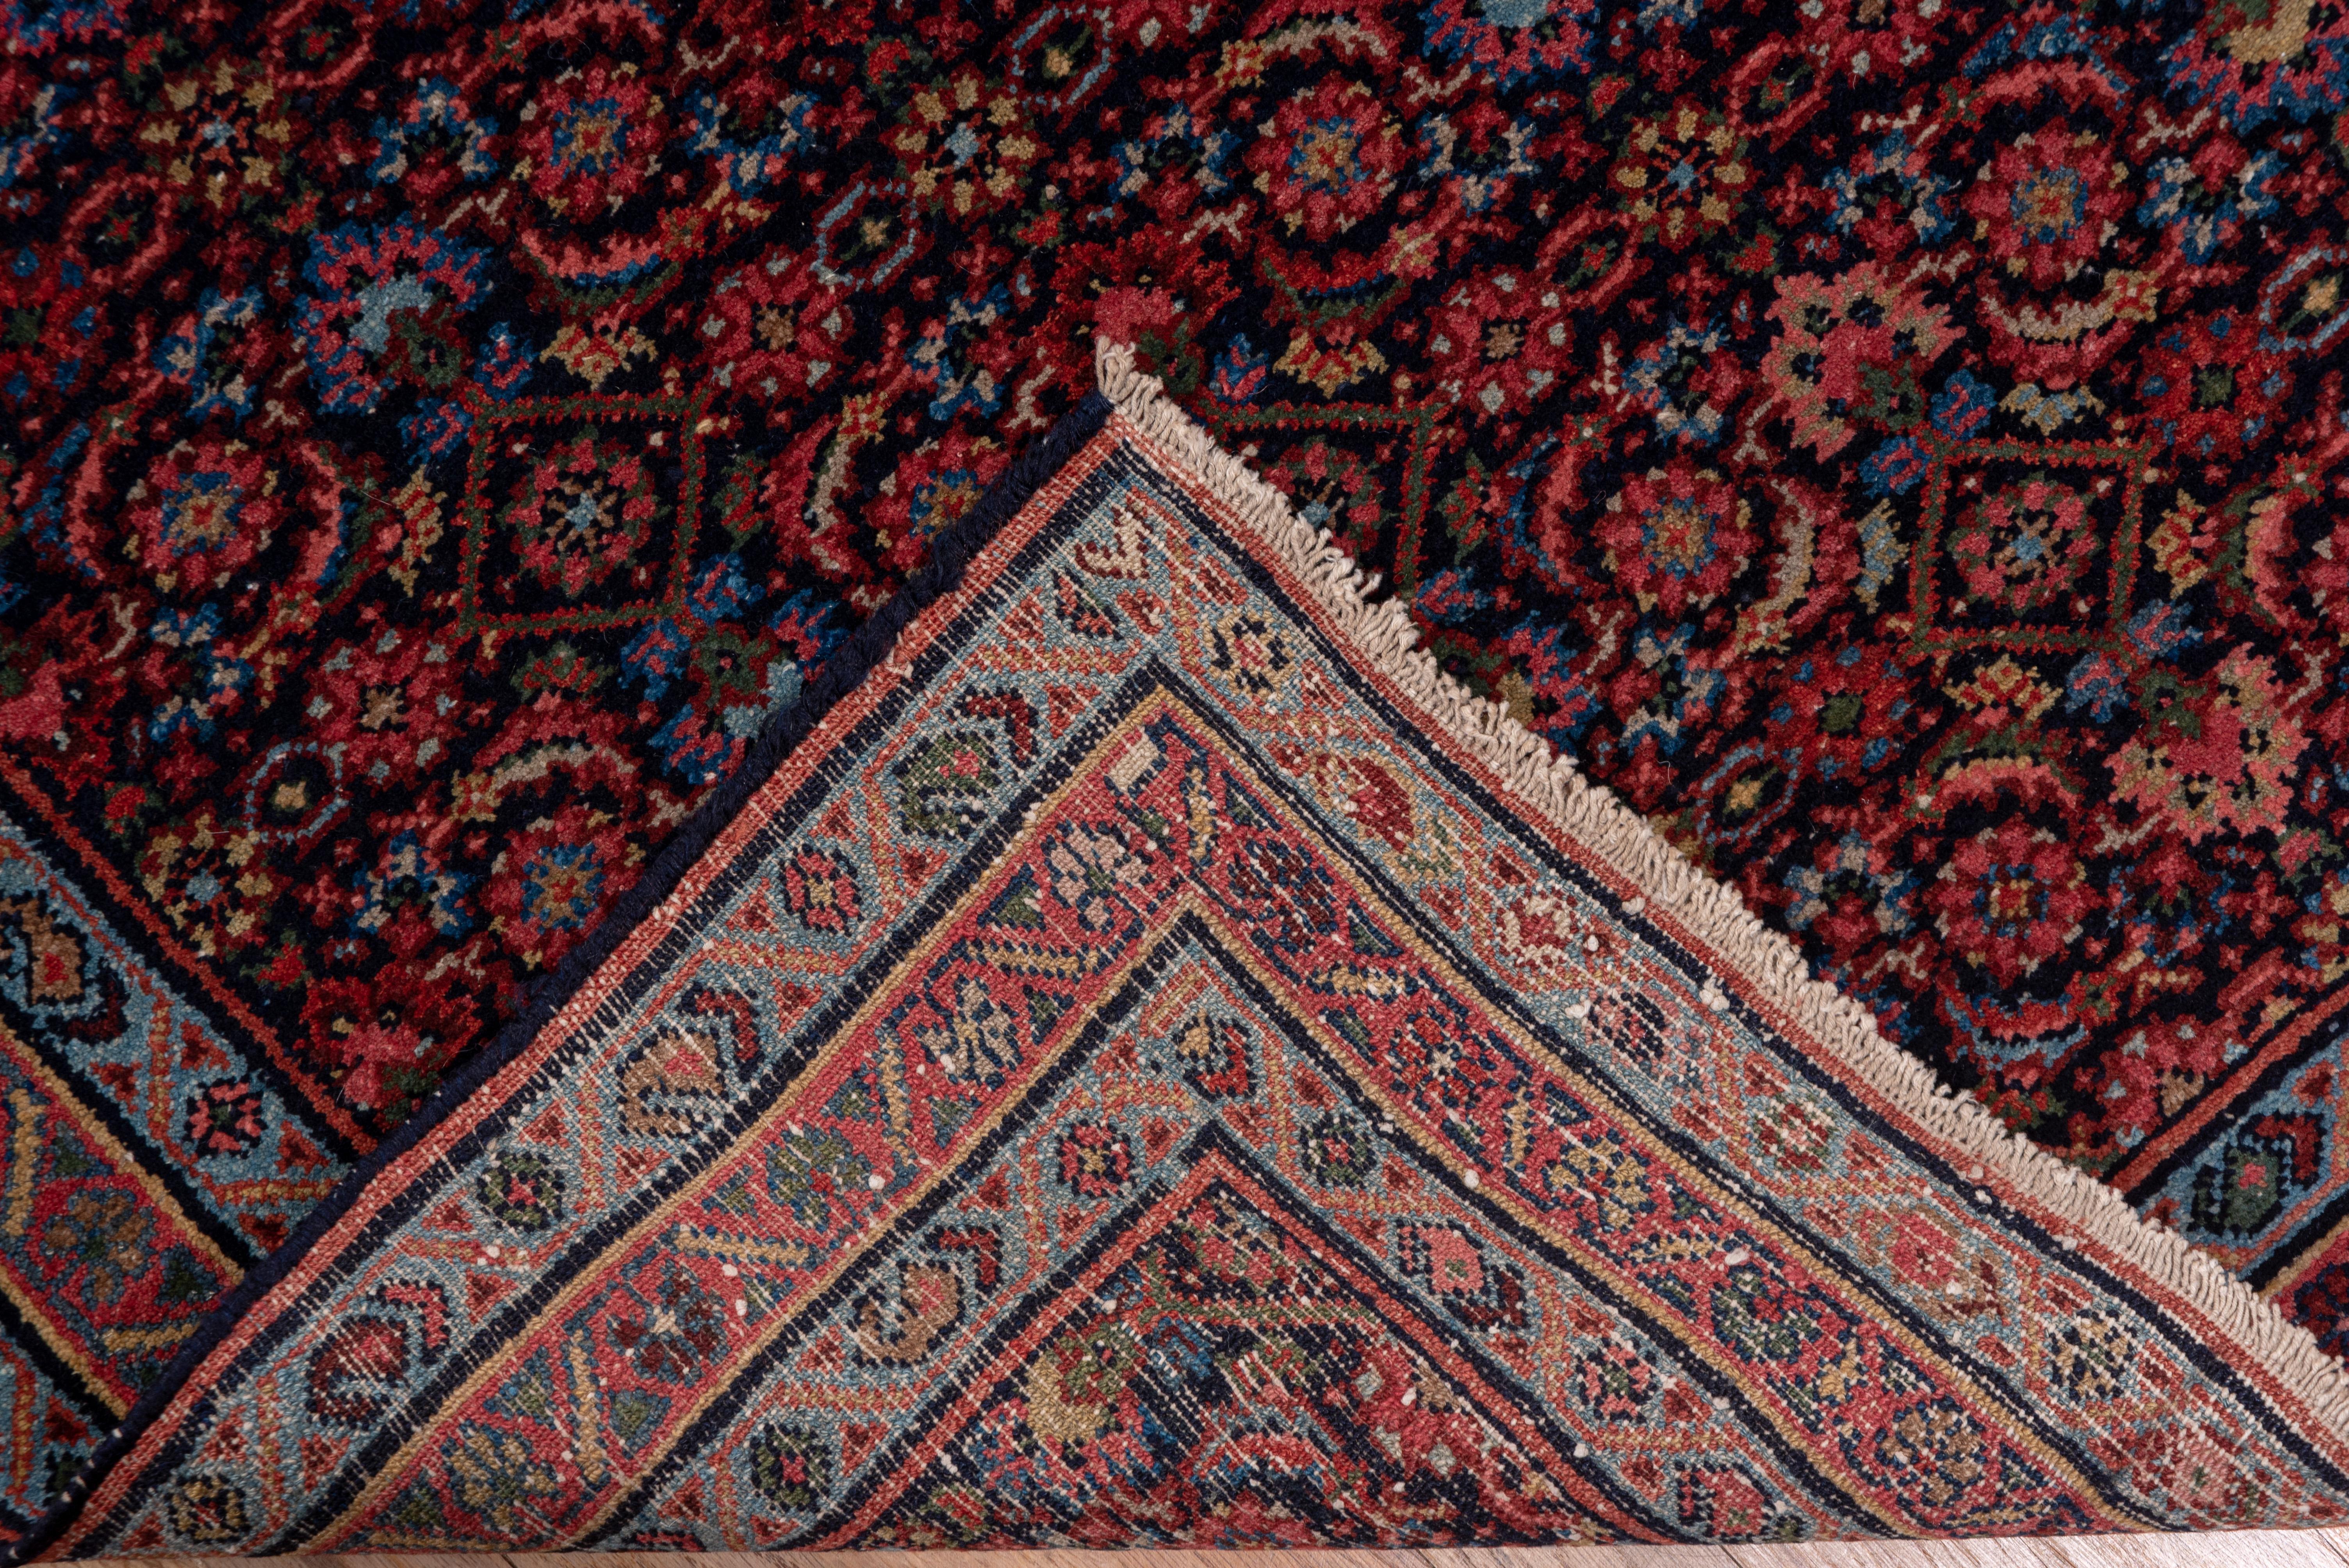 The navy field is perfectly fitted with a dense allover Herati design accented in crisp light blue and mid-red. Narrow borders with boteh chains and reversing fan palmettes. Good, medium rustic West Persian weave on cotton foundation.